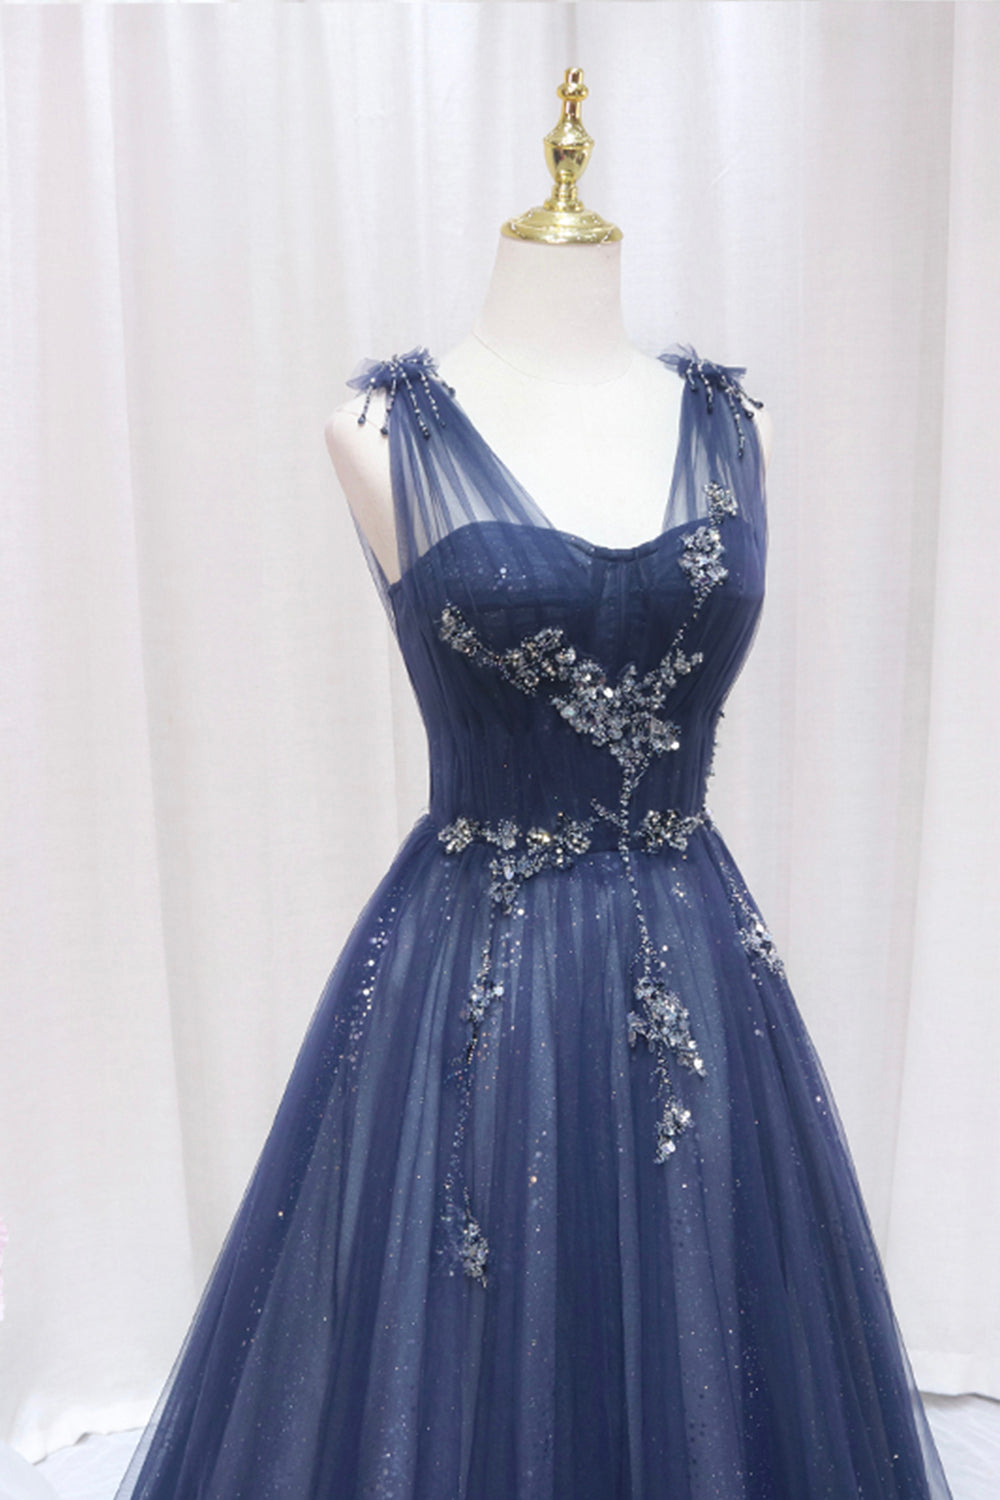 Blue Tulle Beaded Long Prom Dress, Blue A-Line Sweetheart Evening Party Dress